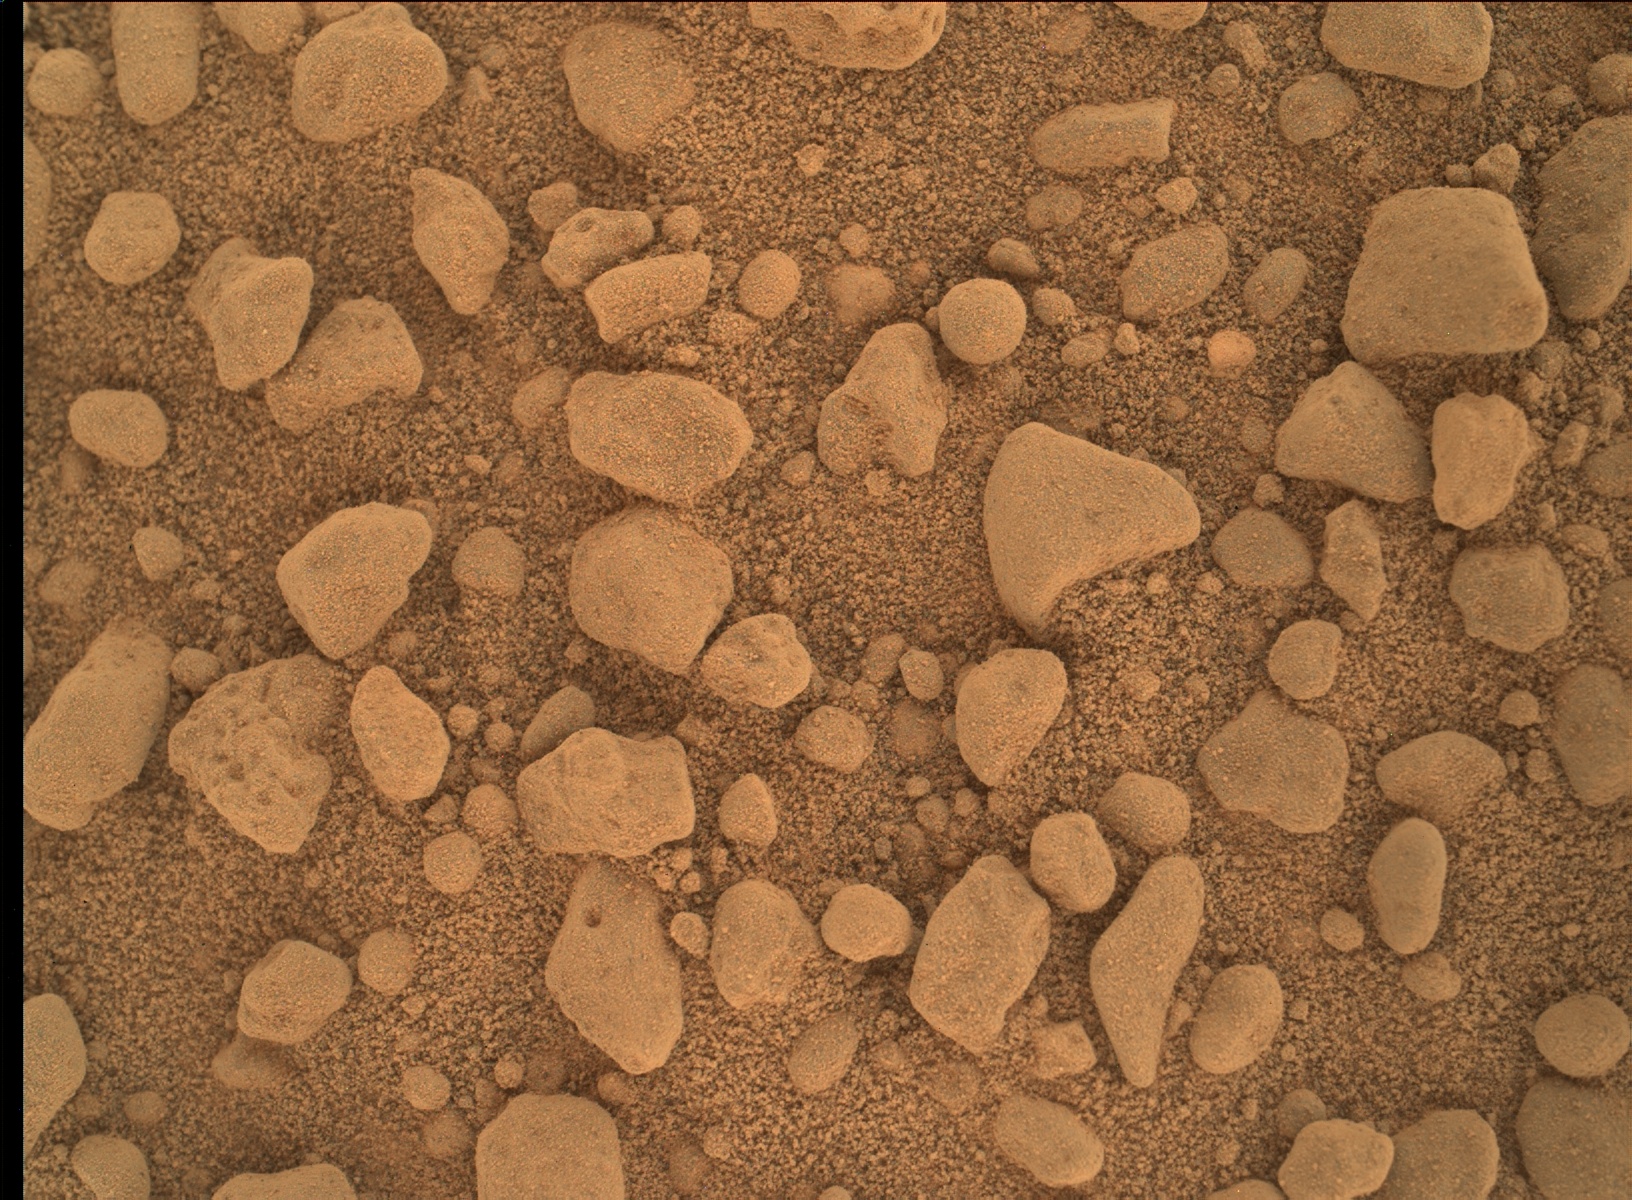 Nasa's Mars rover Curiosity acquired this image using its Mars Hand Lens Imager (MAHLI) on Sol 704